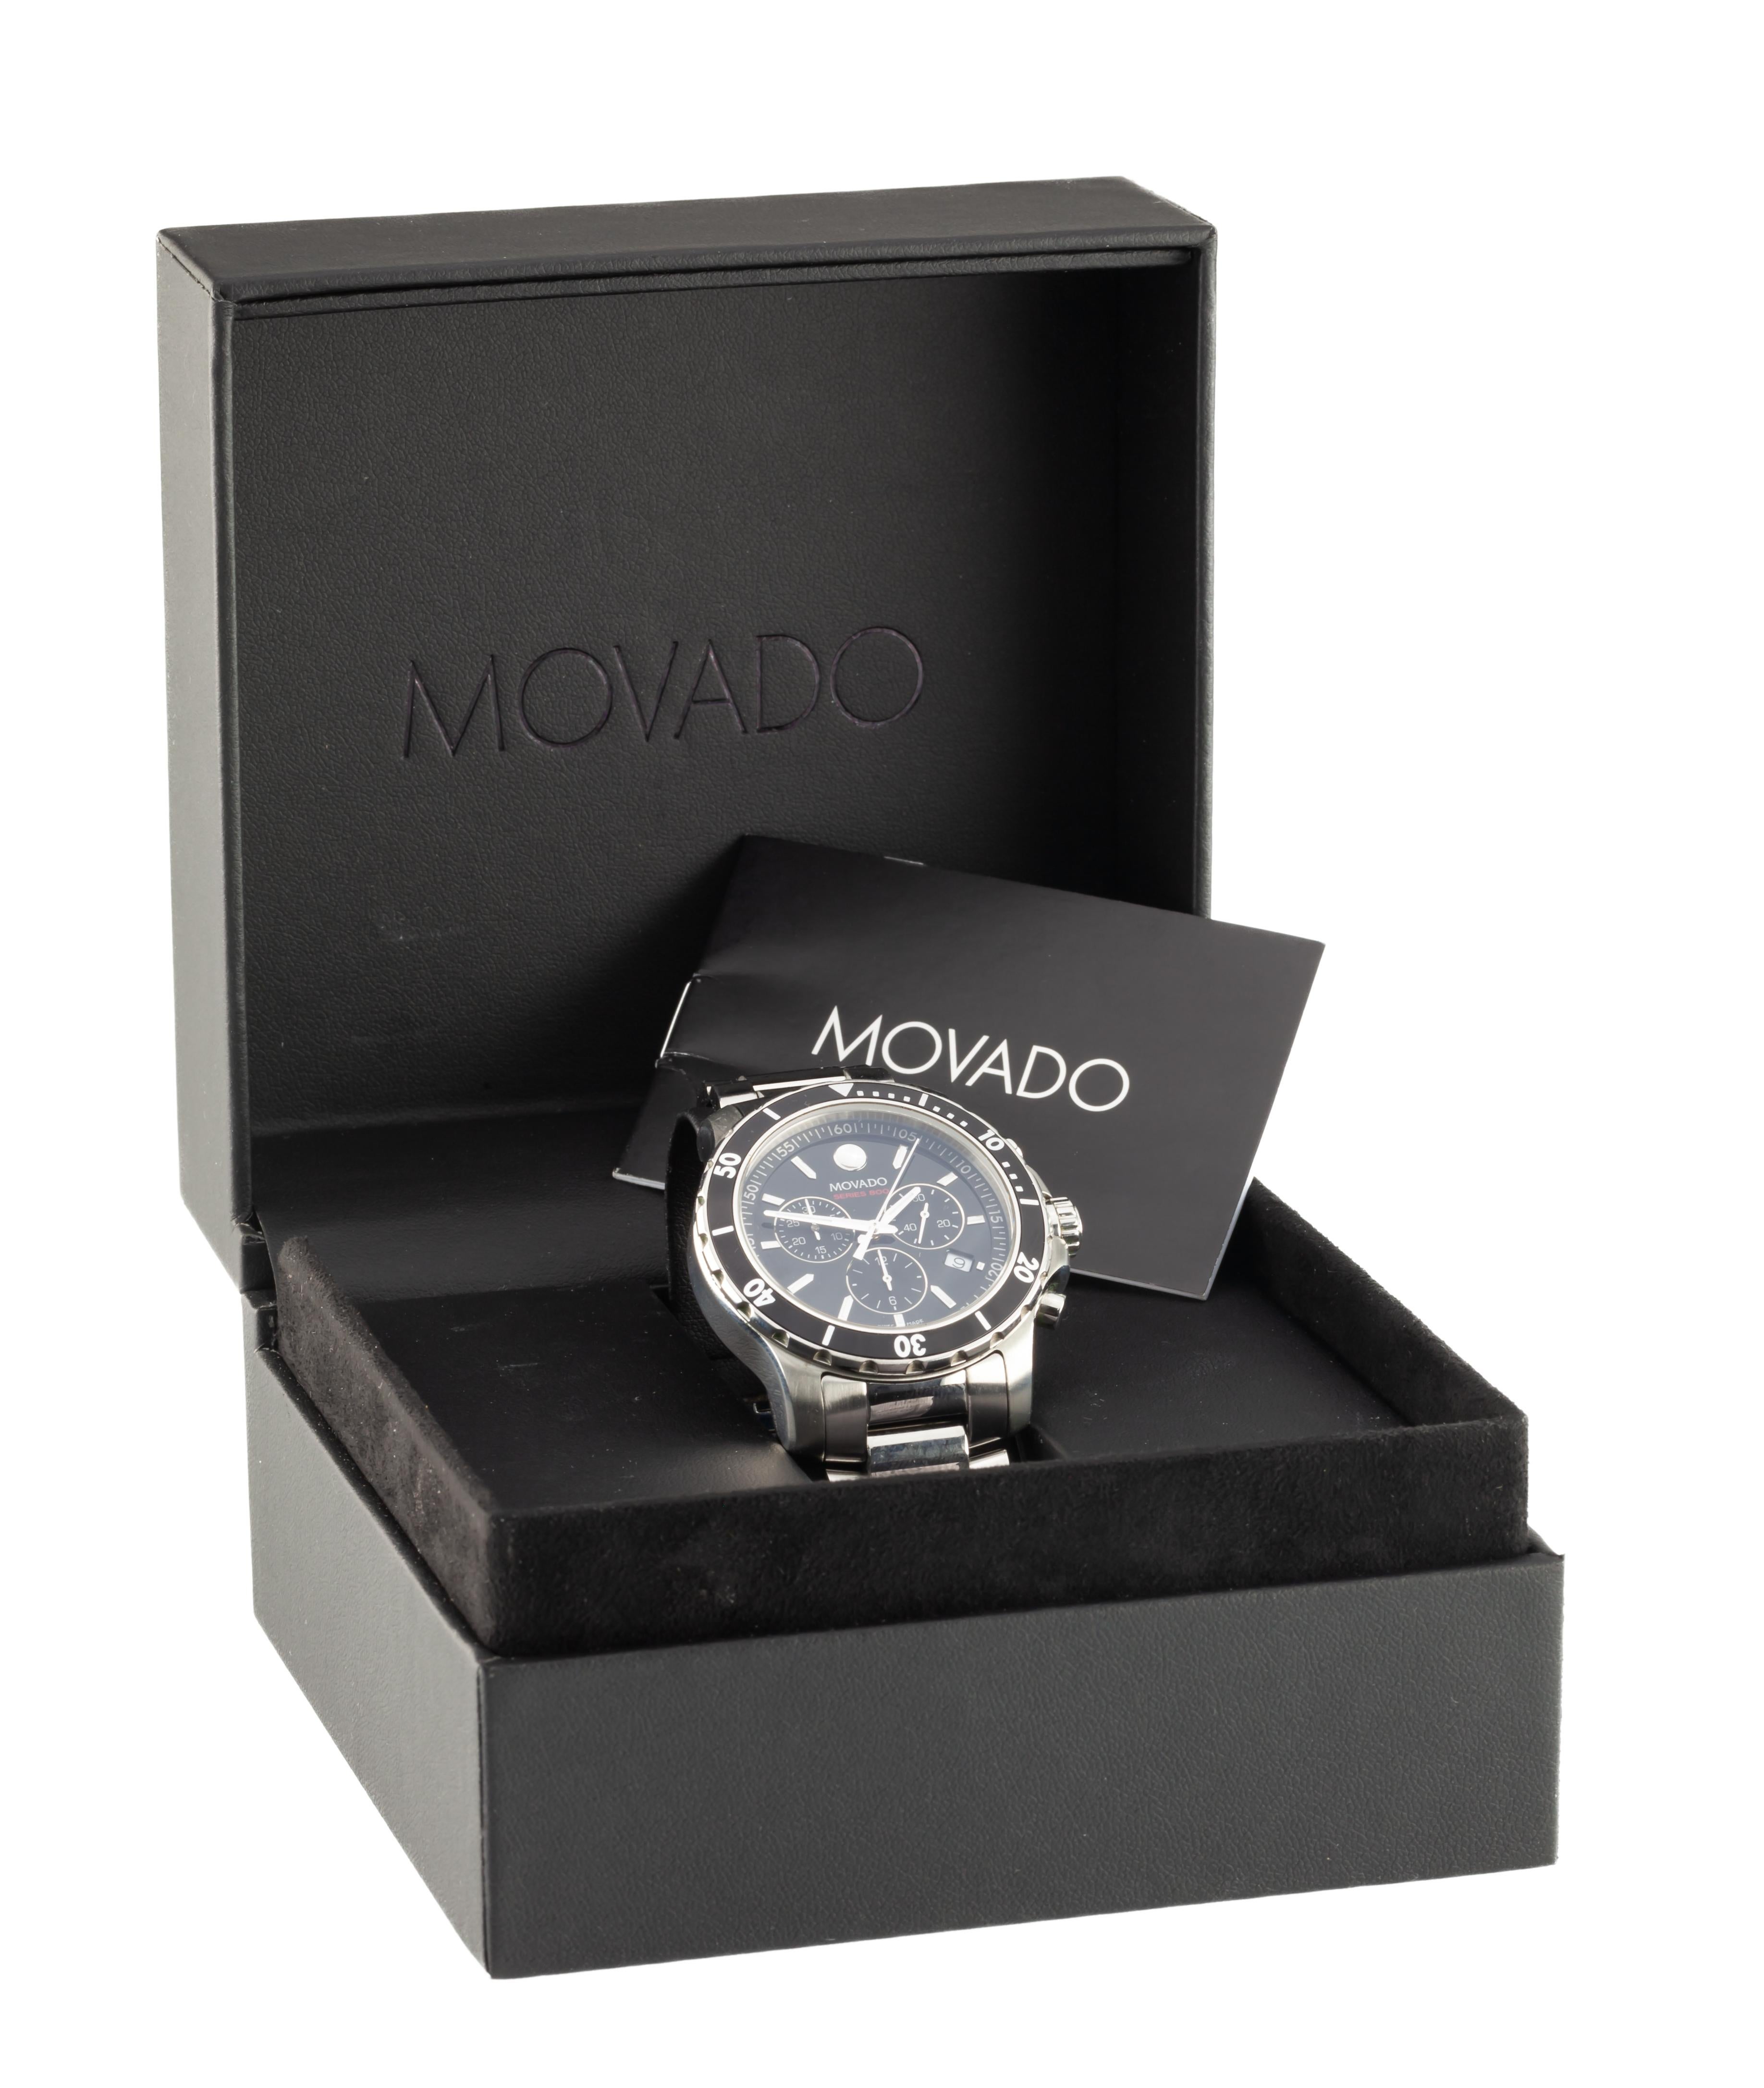 Movado Series 800 Men's Quartz Chronograph w/ Box and Papers For Sale 2